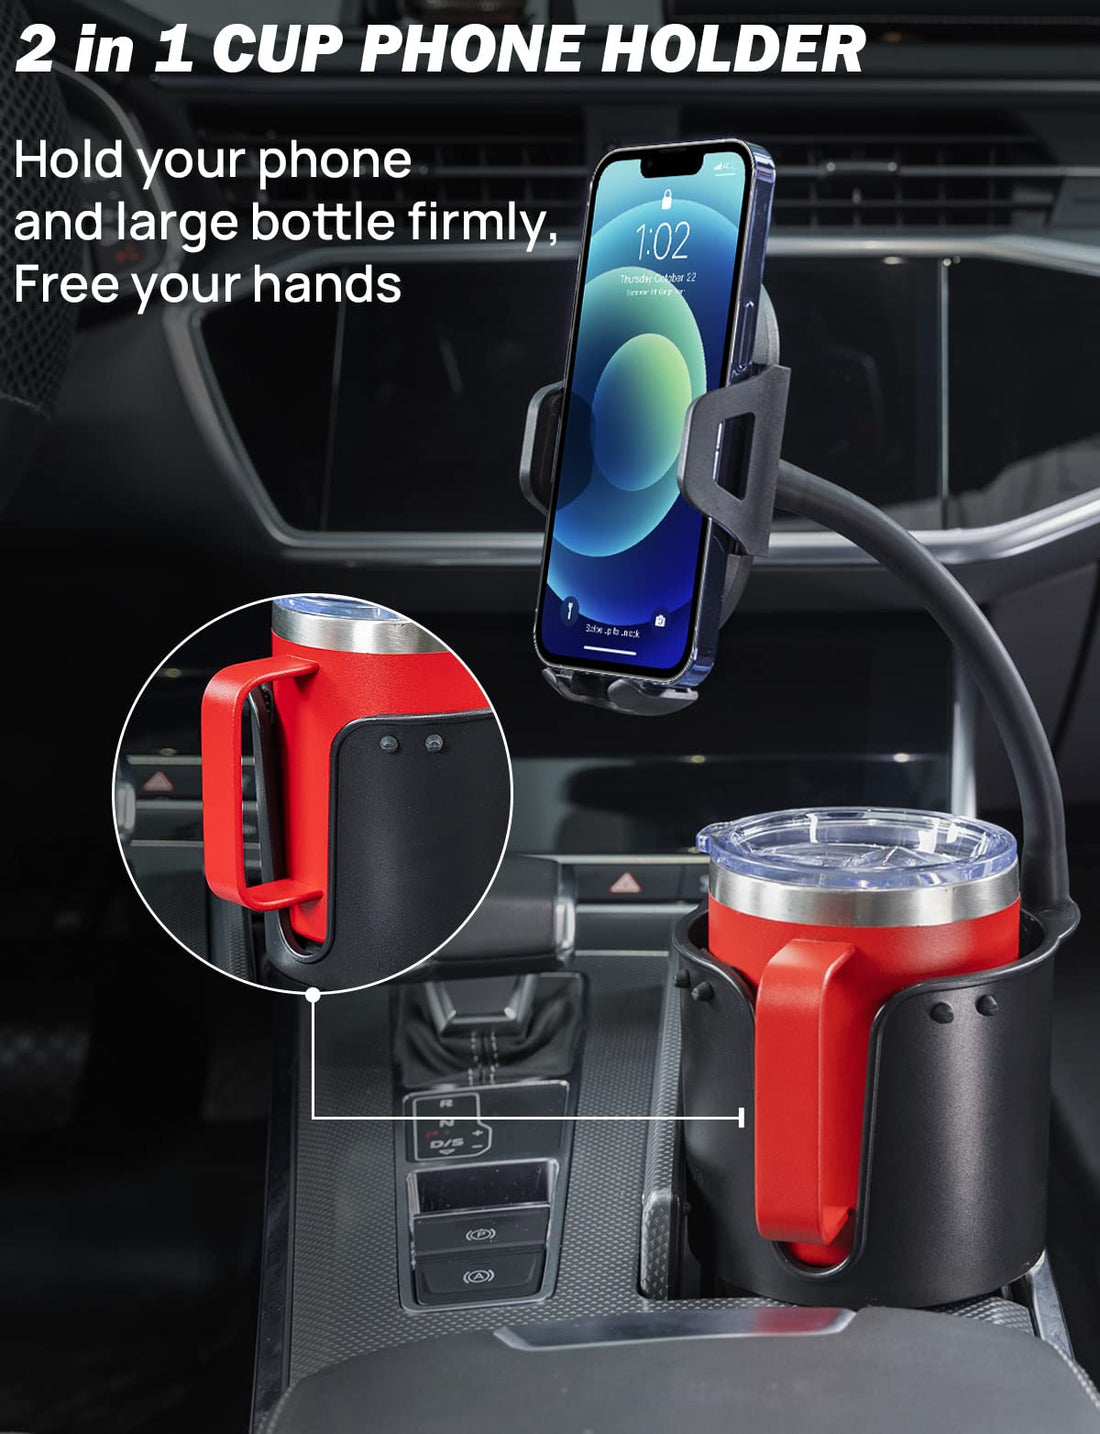 Car Cup Holder Phone Mount Cell Phone Holder Universal Perfect for Smartphones up to 6.7"